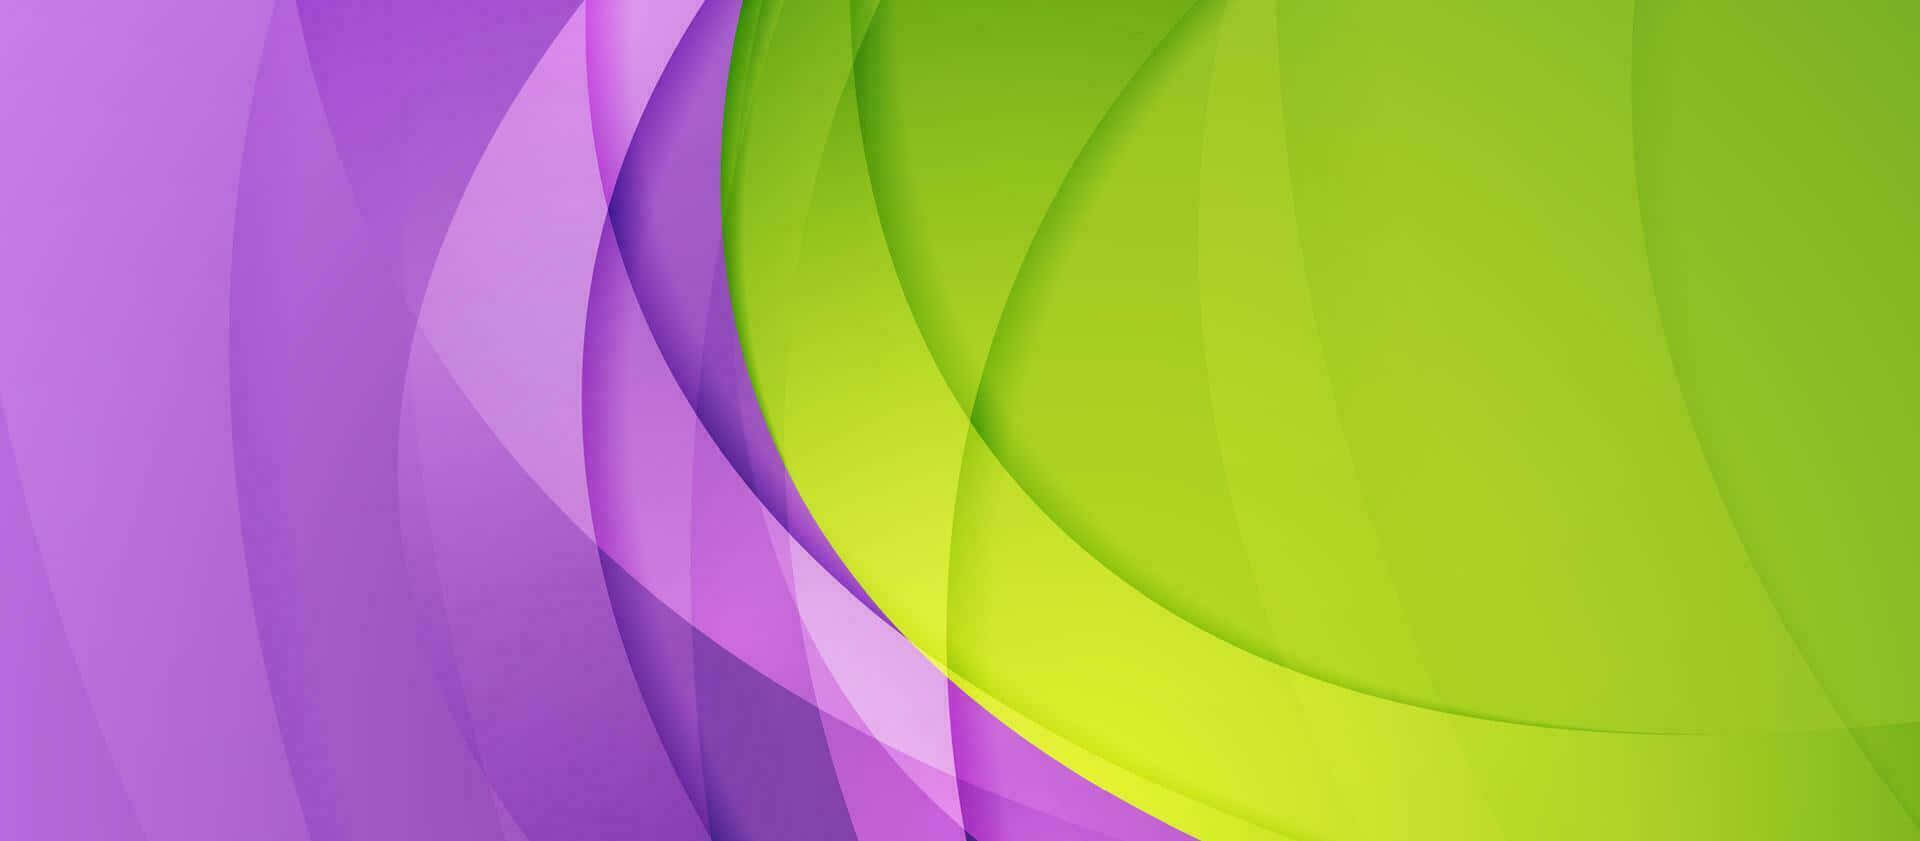 Purple Green Abstract Waves Wallpaper